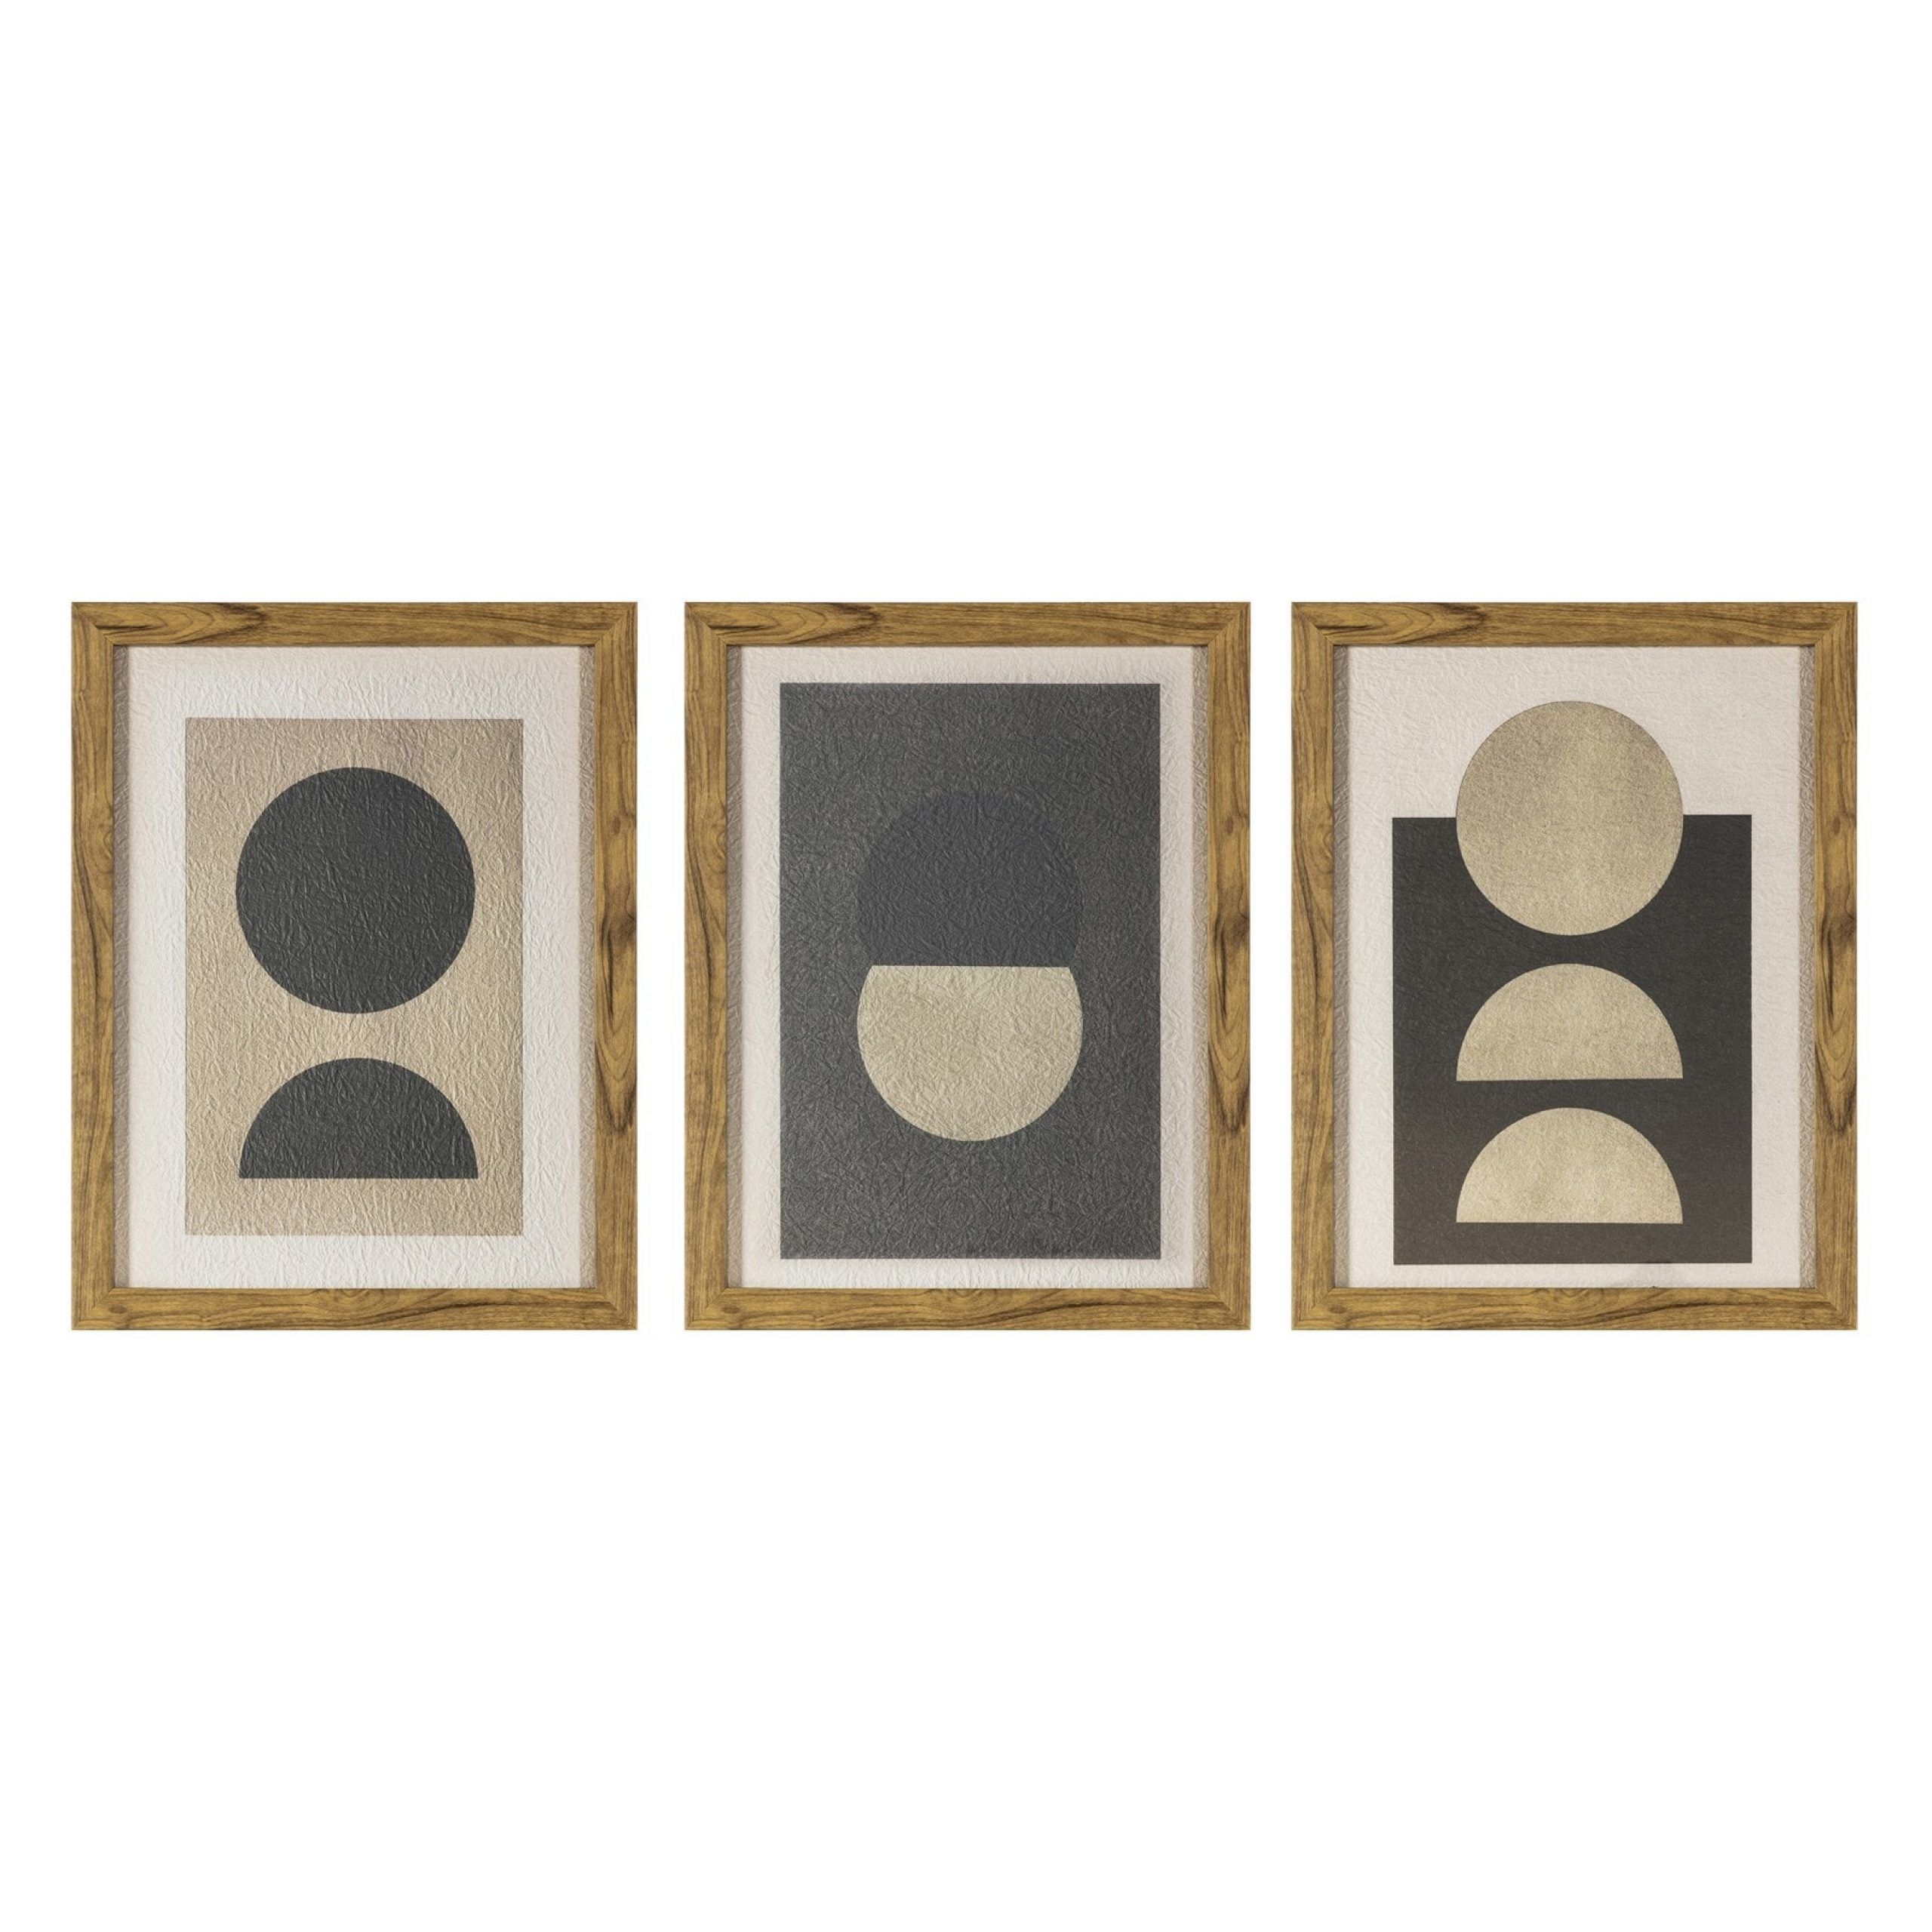 Buy Set Of 3 Luna Framed Wall Artgallery Direct From With Regard To Recent Luna Wood Wall Art (View 10 of 20)